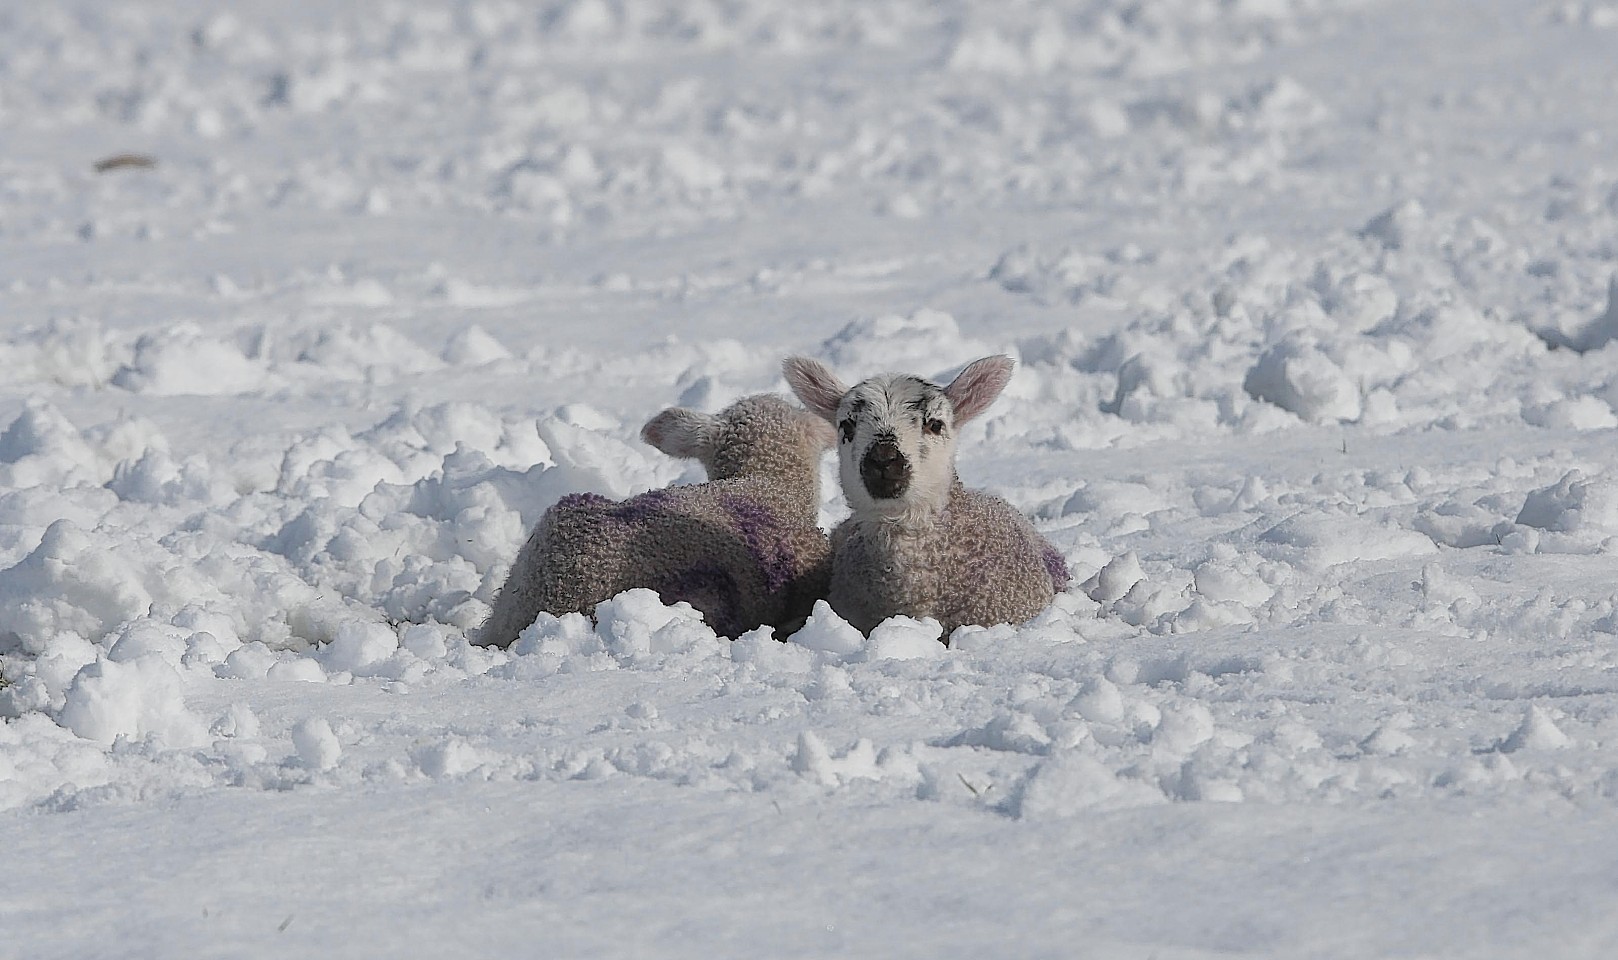 Lambs in the snow at a farm near Inverness. Photo by Peter Jolly